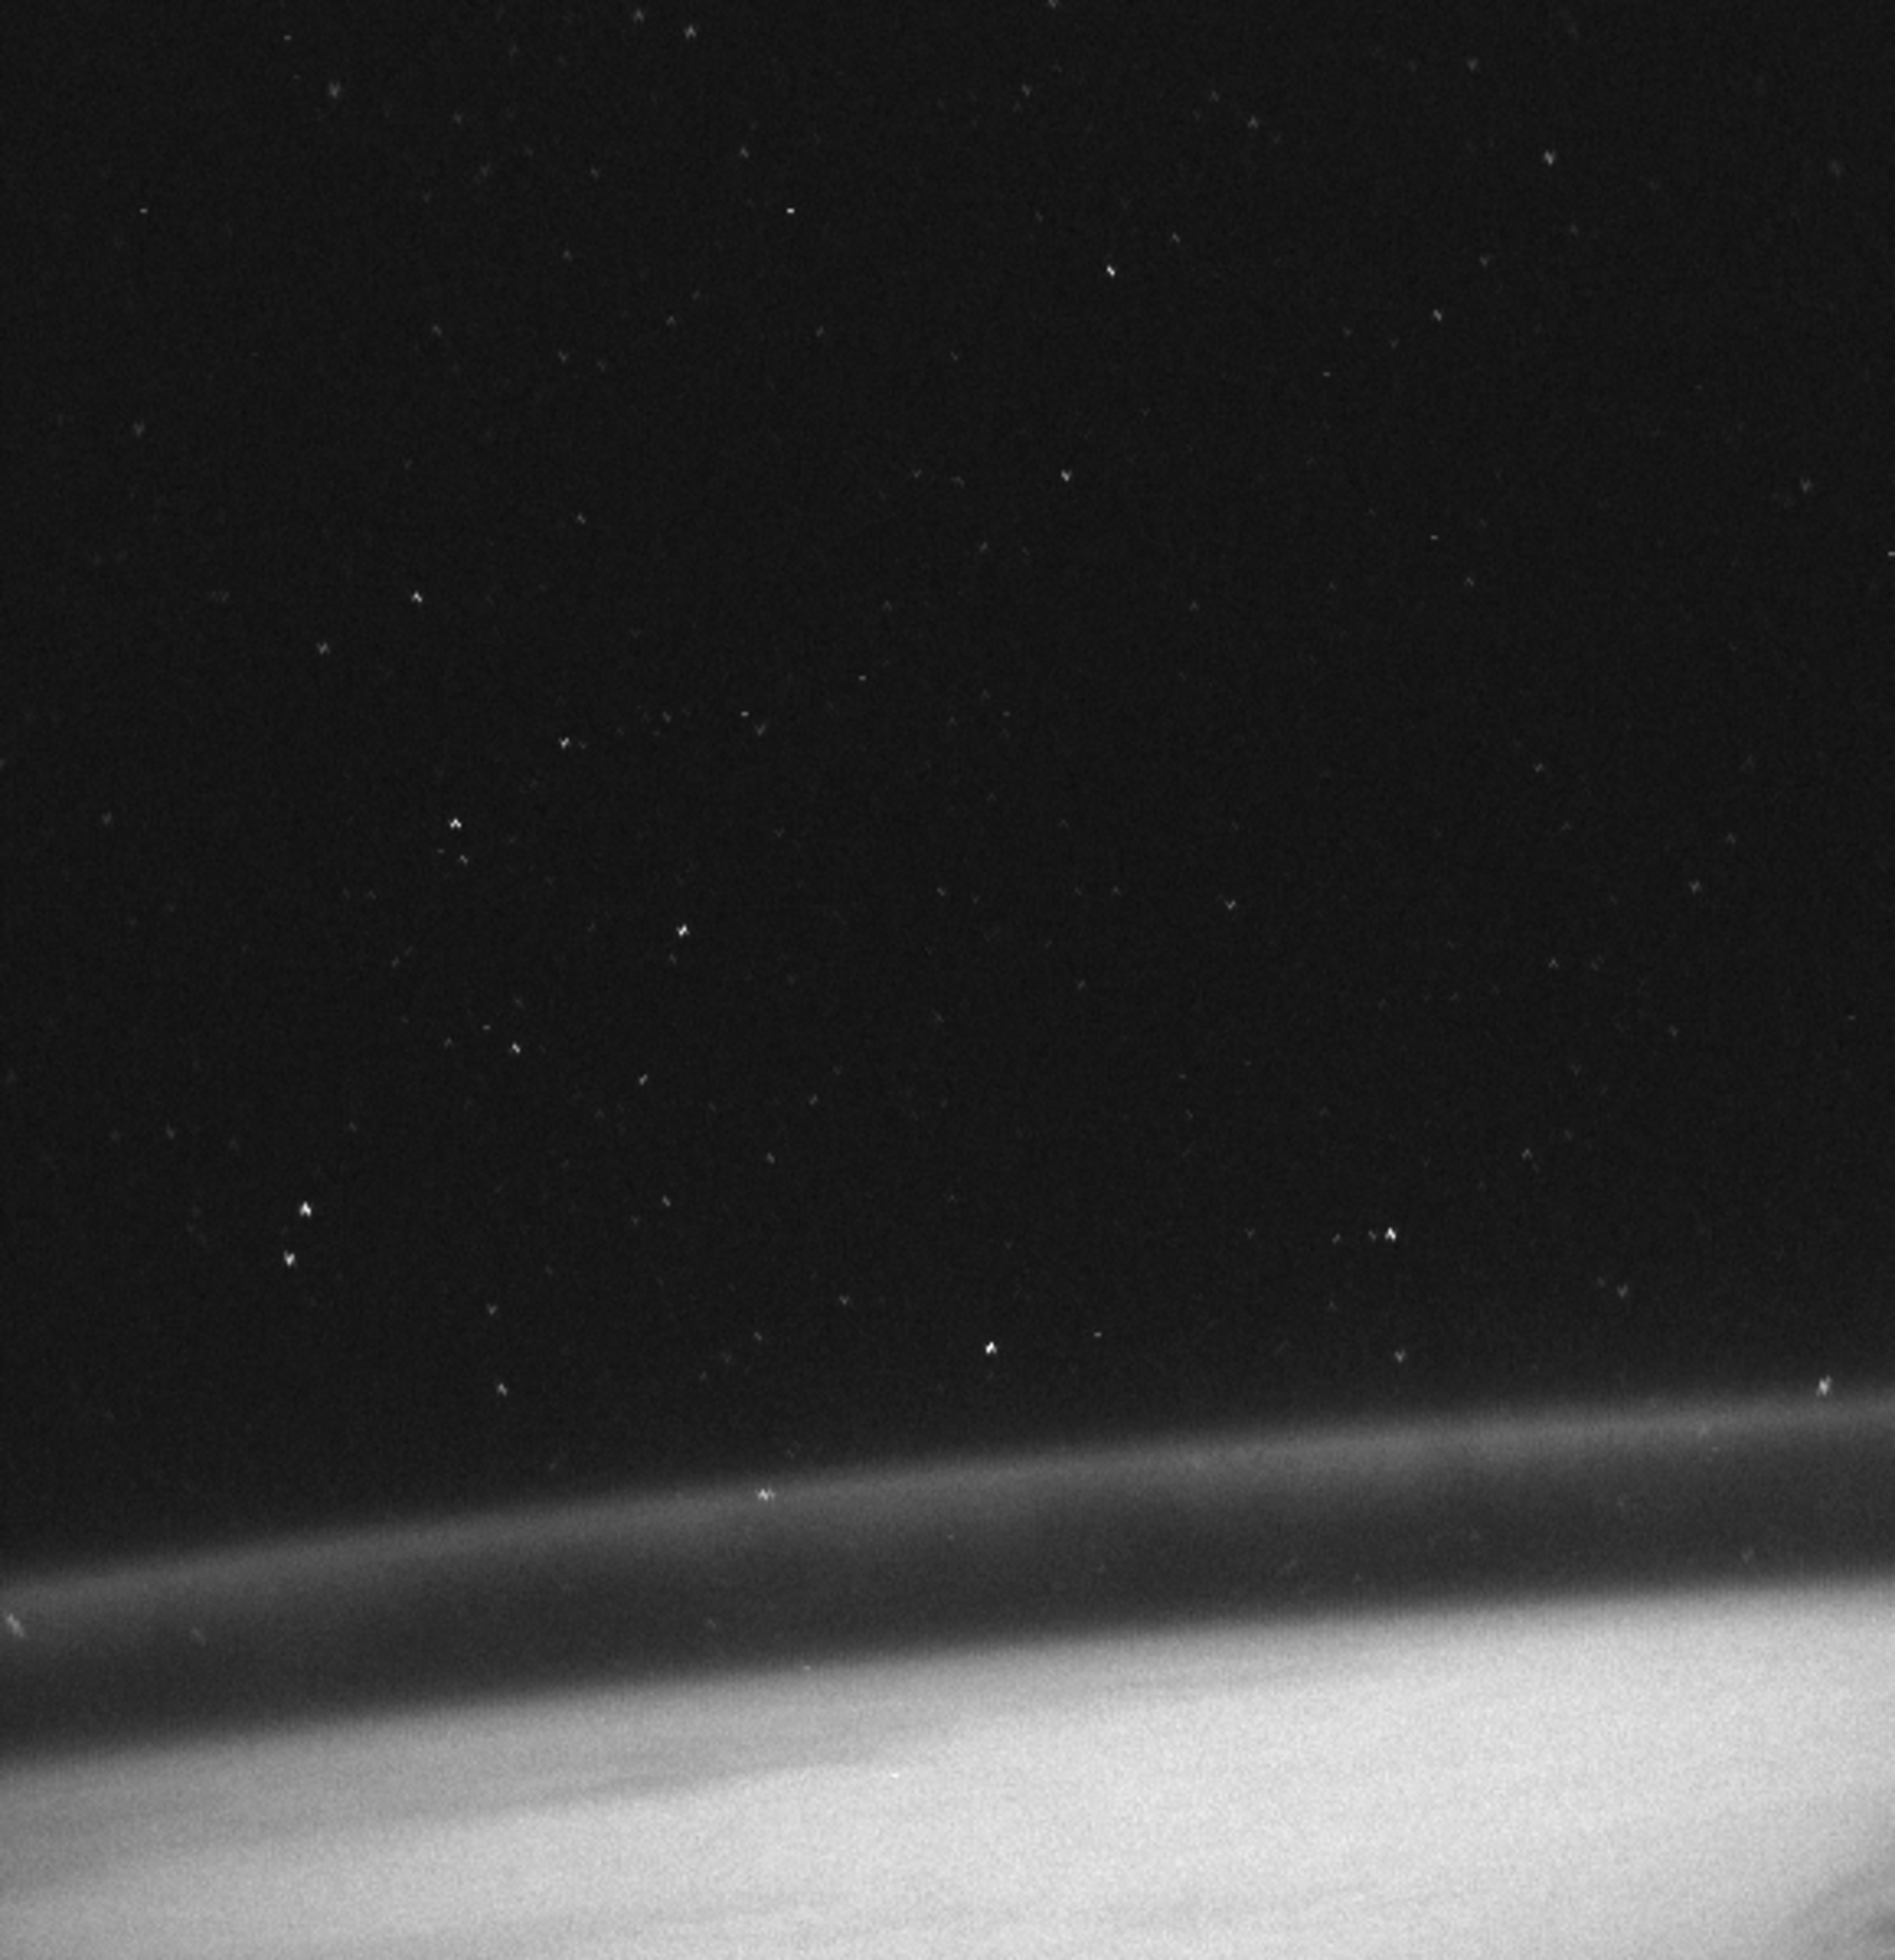 Image from Proba-2's startracker